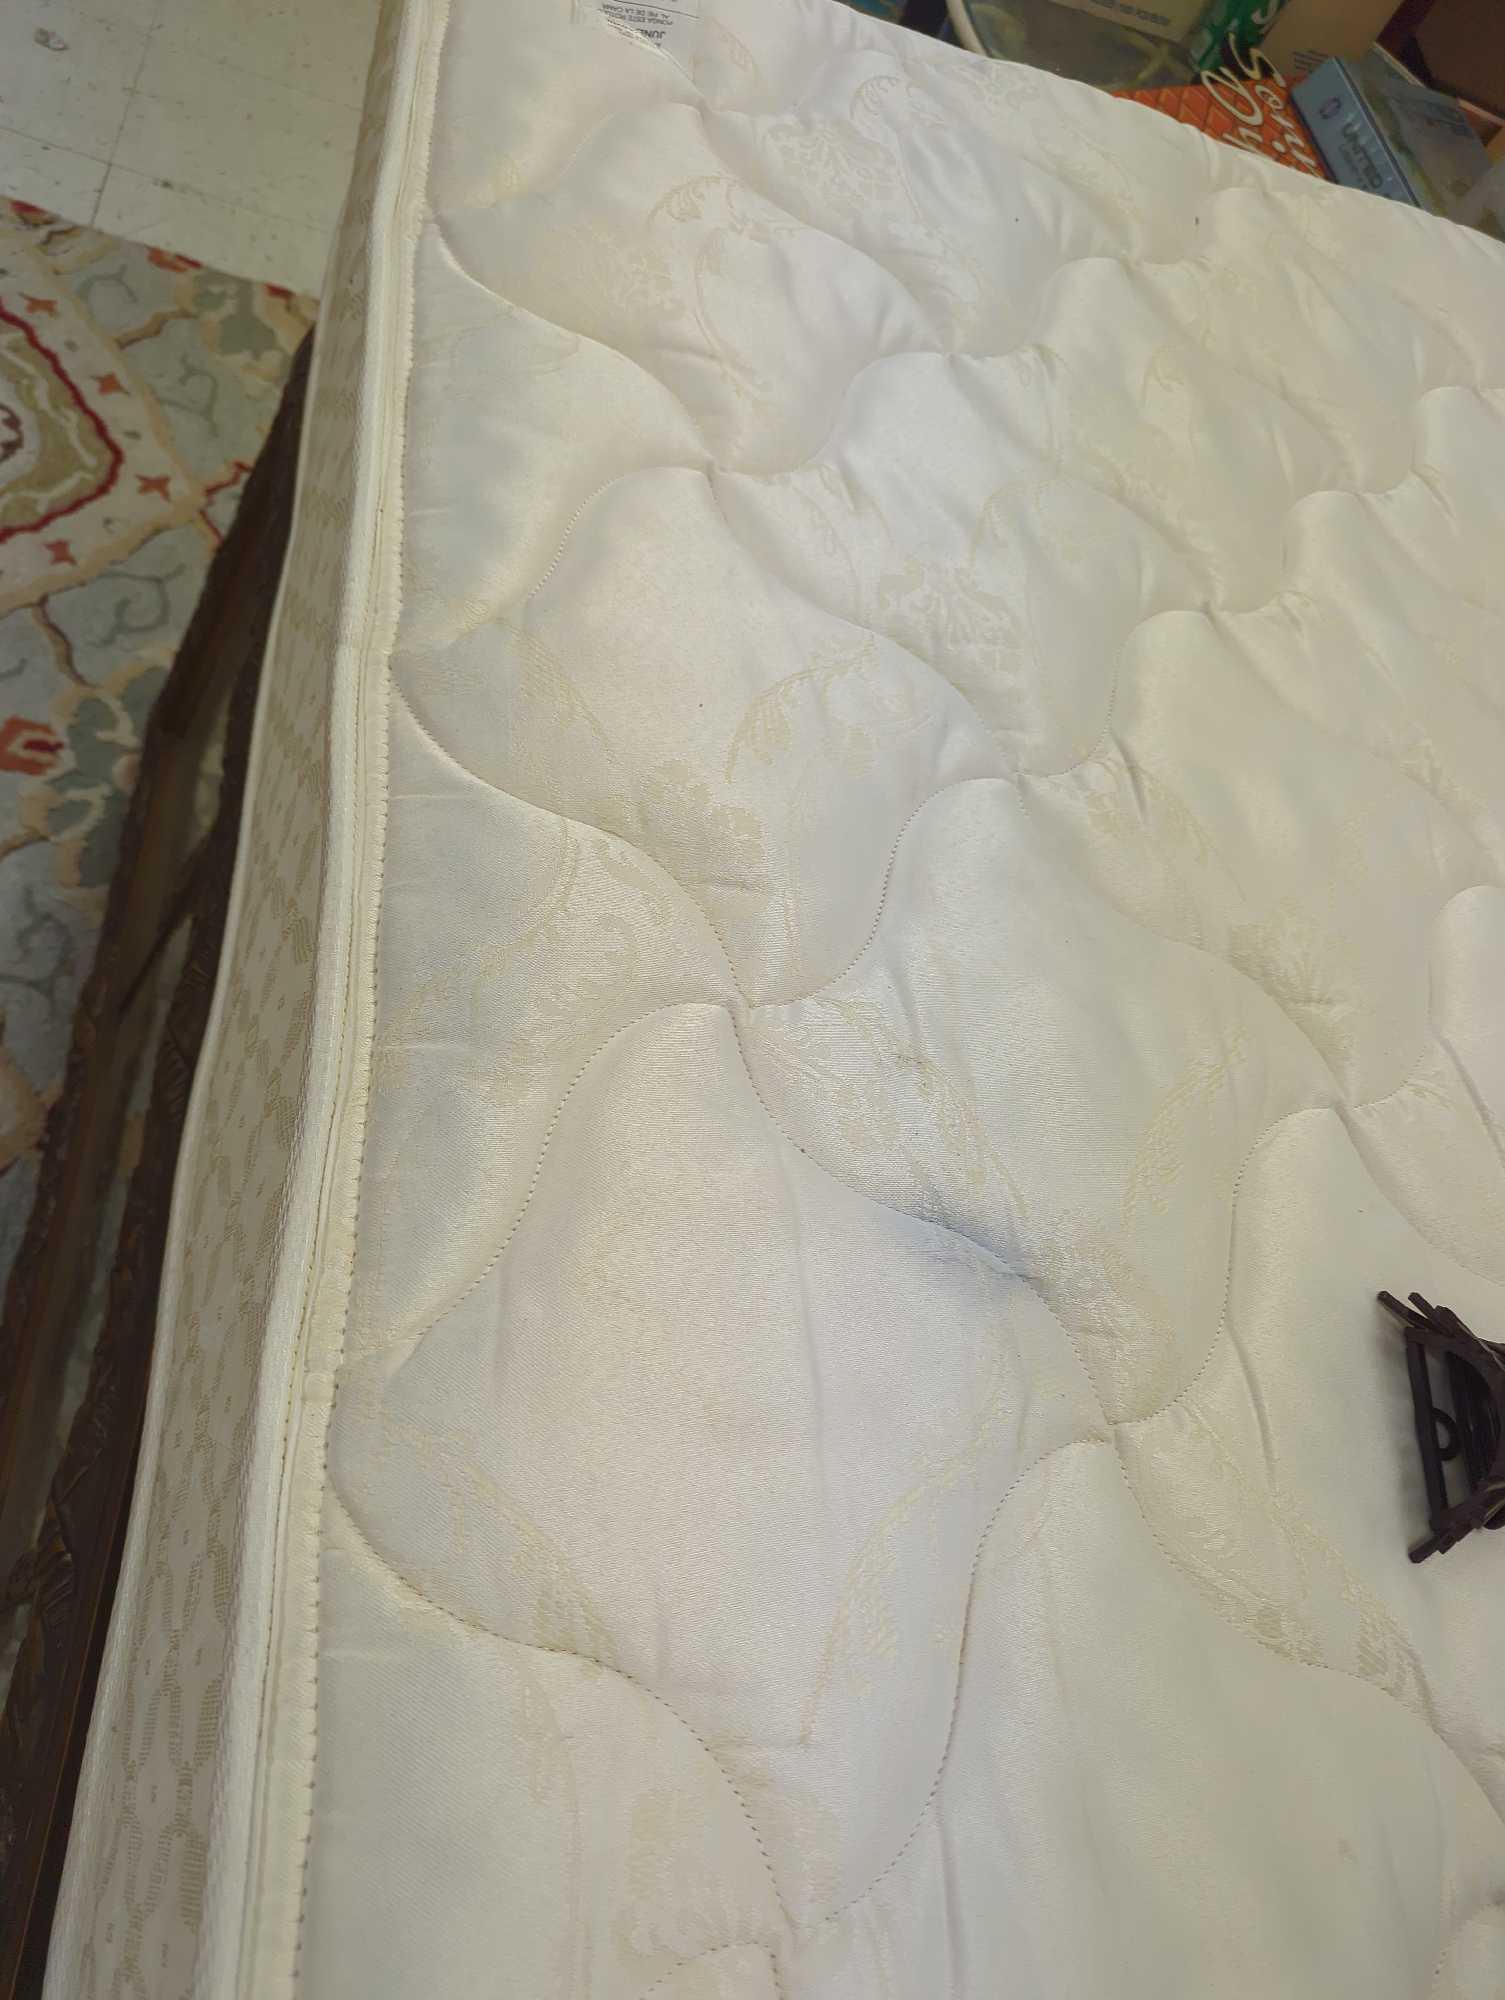 Serta Full XL Mattress and Box Spring Combo Used But in Really Great Condition What you see in